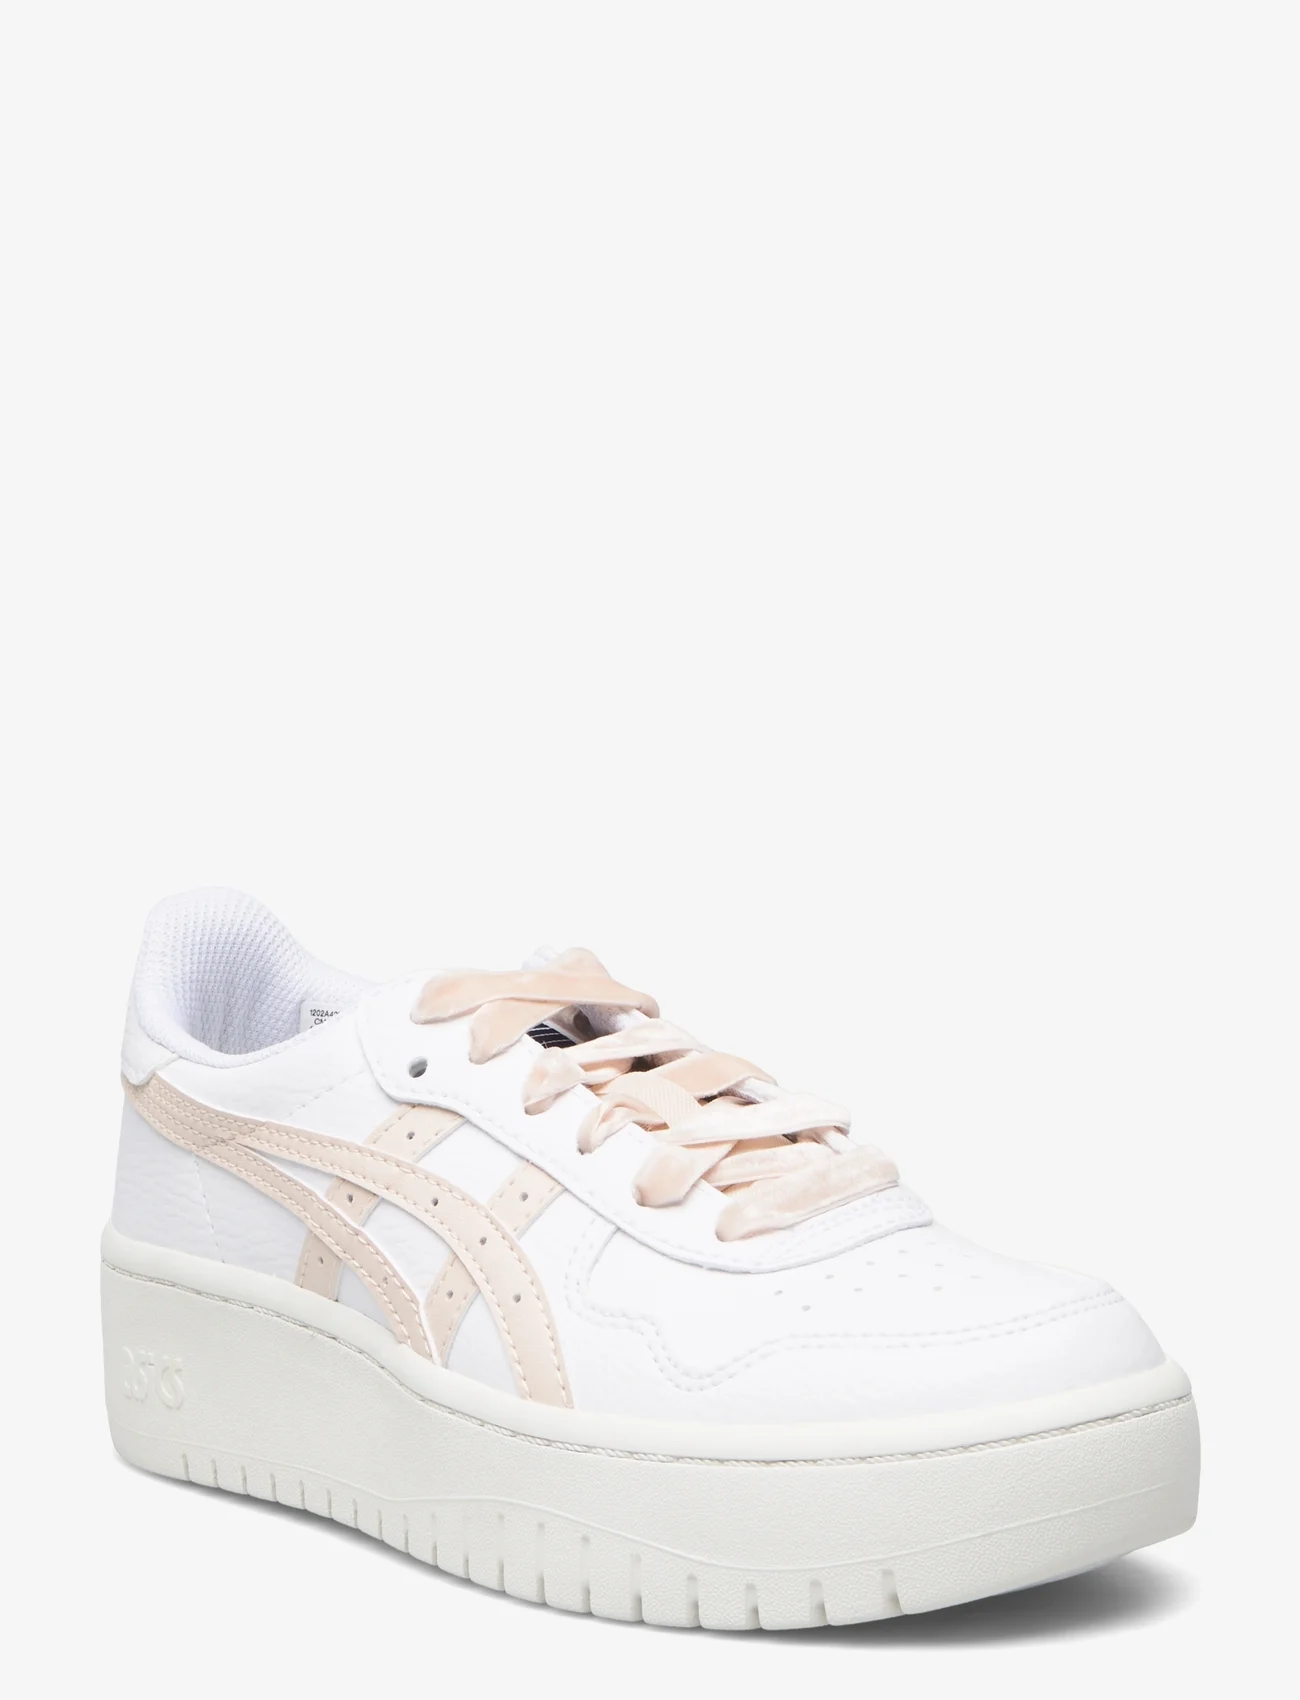 Asics - JAPAN S PF - low top sneakers - white/mineral beige - 0